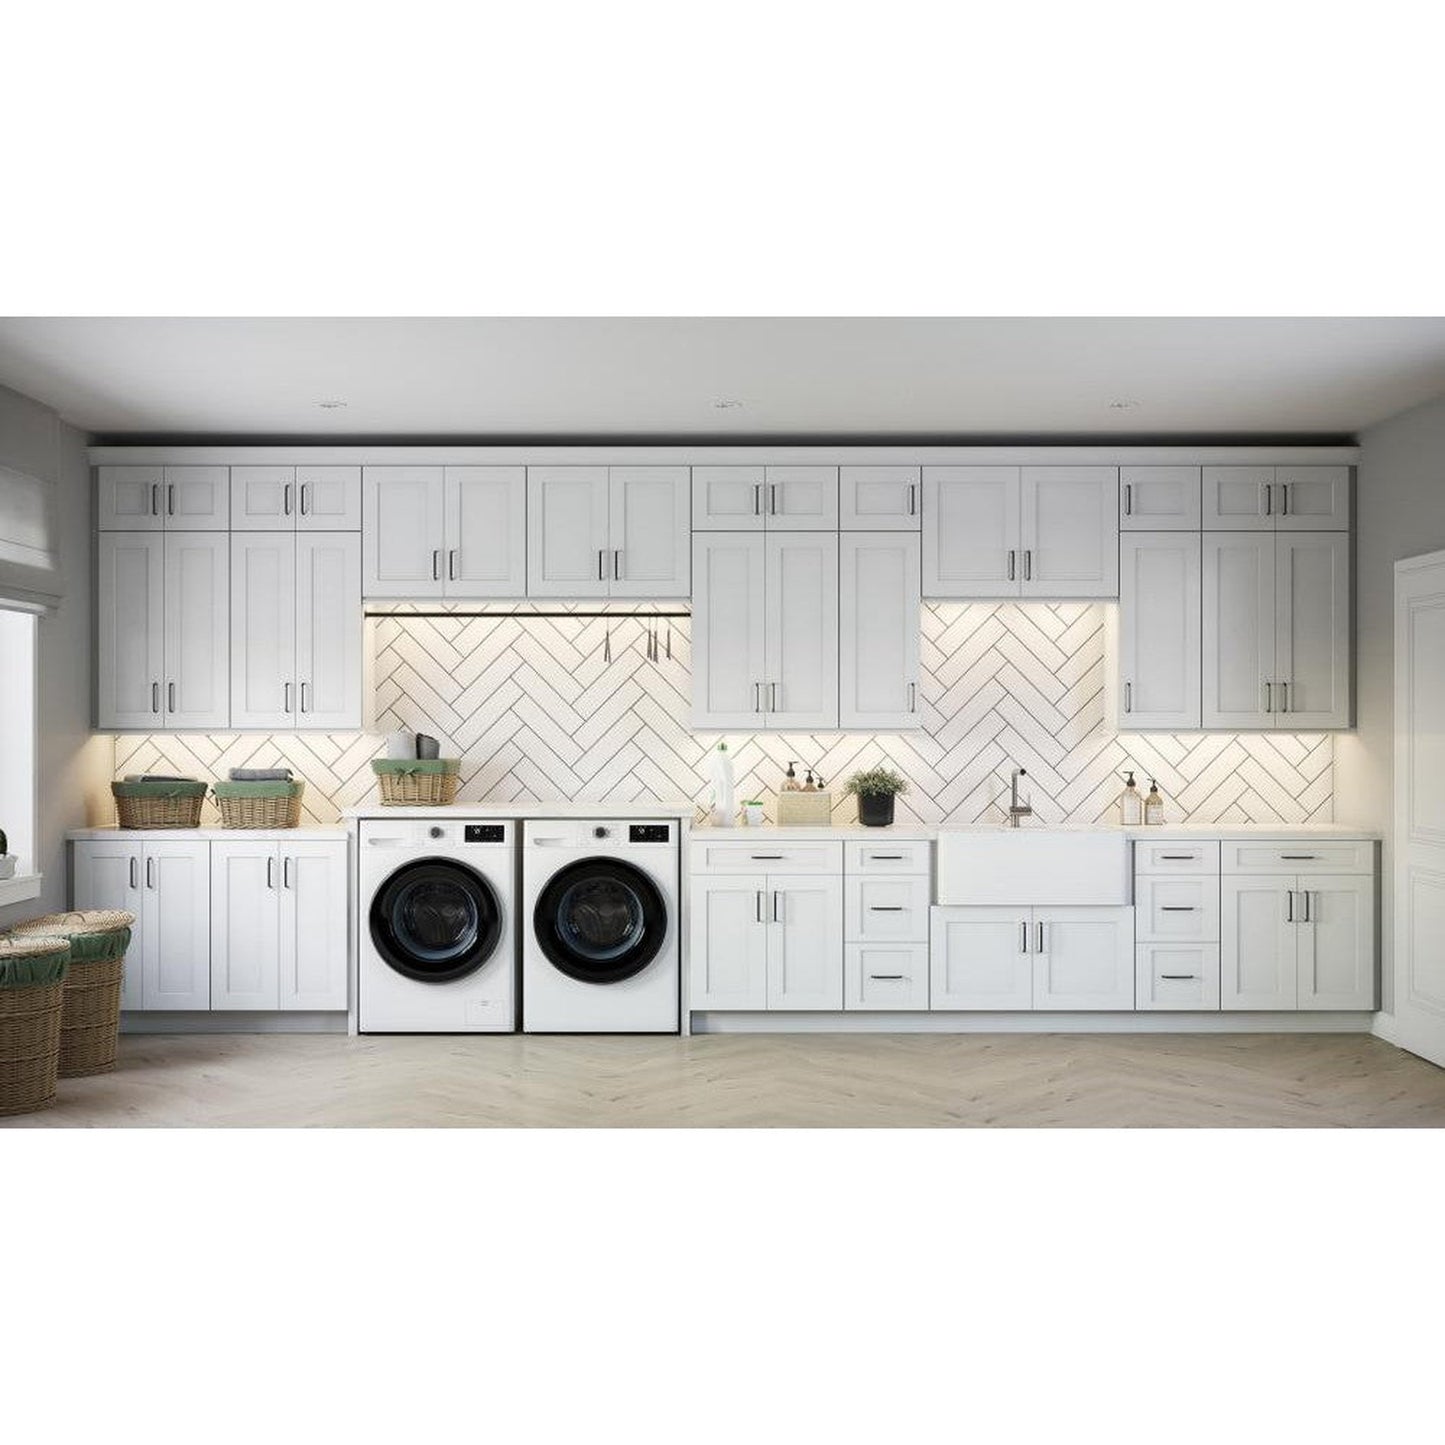 RTA Frosted White Shaker 60" Vanity Sink Base Cabinet with 3 Drawers and 2 Decorative End Panels